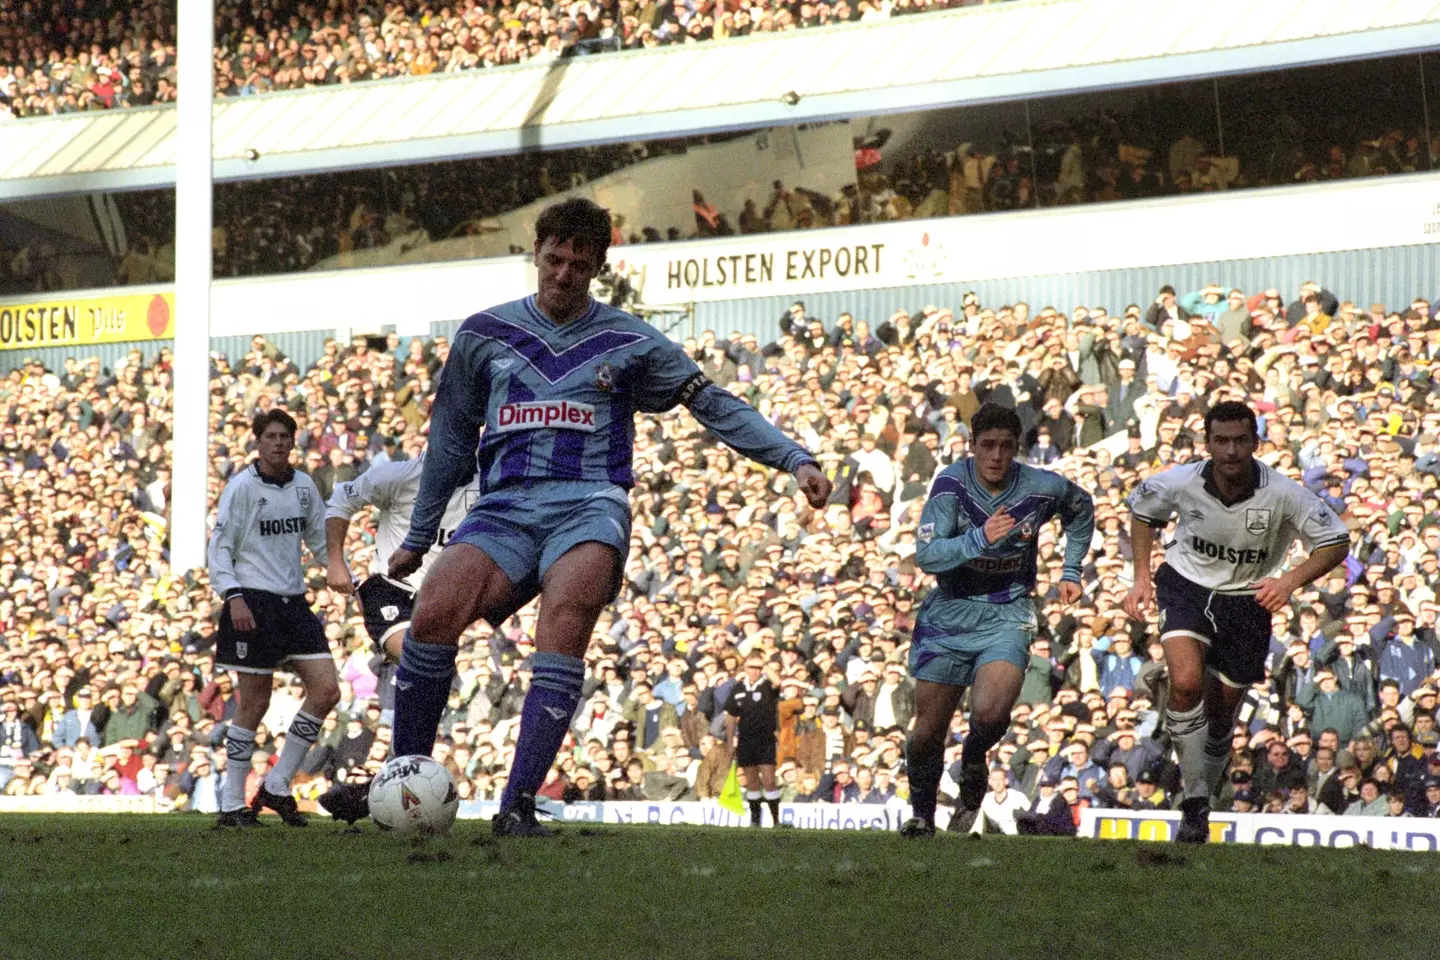 Le Tissier taking a penalty. (Image